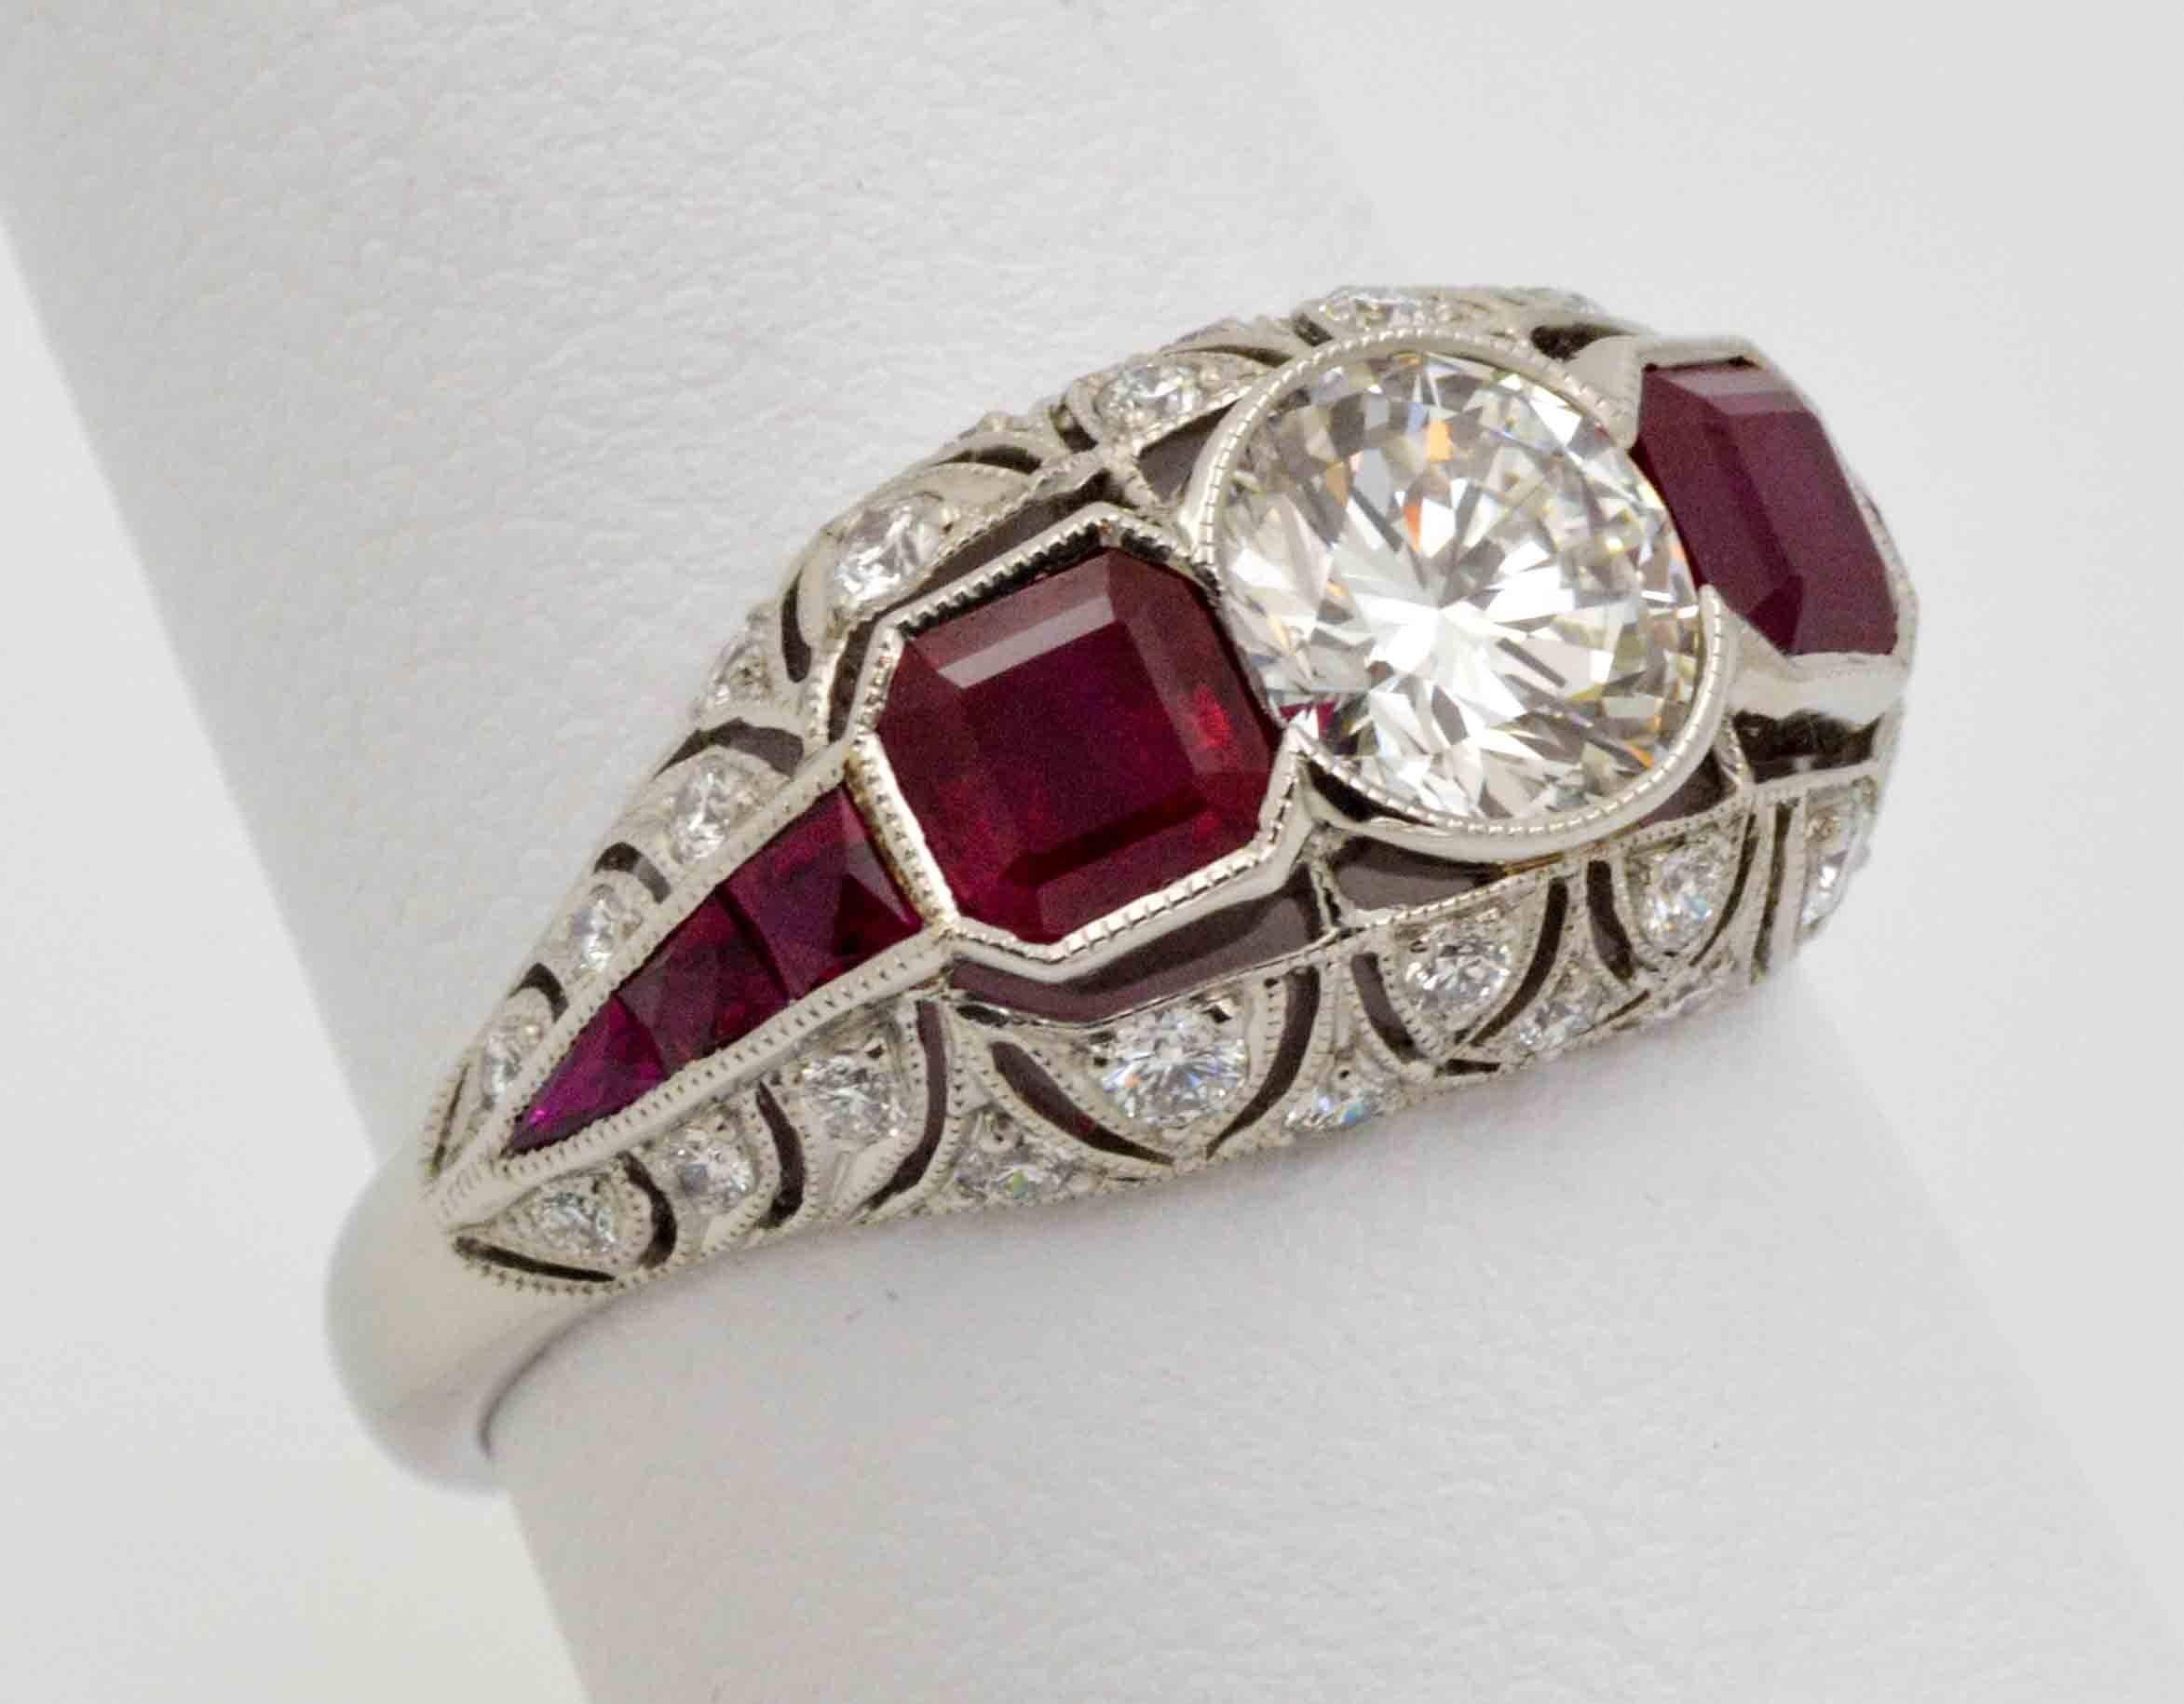 Inspired by Art Deco Style design, this custom handmade engagement ring features an approximate 0.94 carat round brilliant cut diamond with J color and VS1 clarity. The ring is accented with two cushion cut bezel set rubies weighing approximately